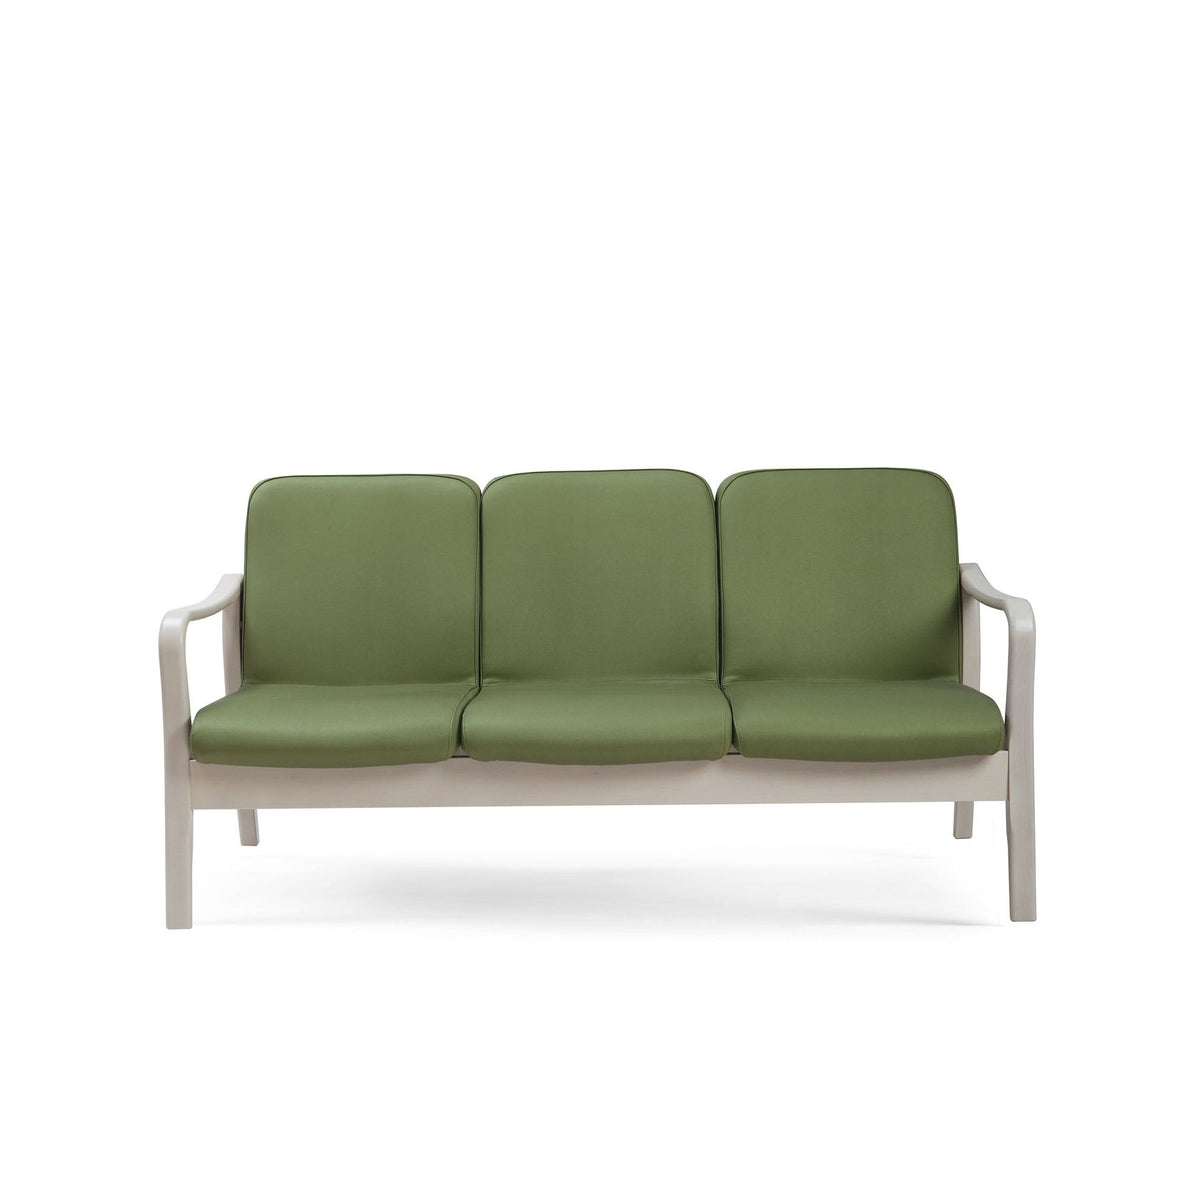 Relax Elegance 16-102/7 Sofa-Piaval-Contract Furniture Store